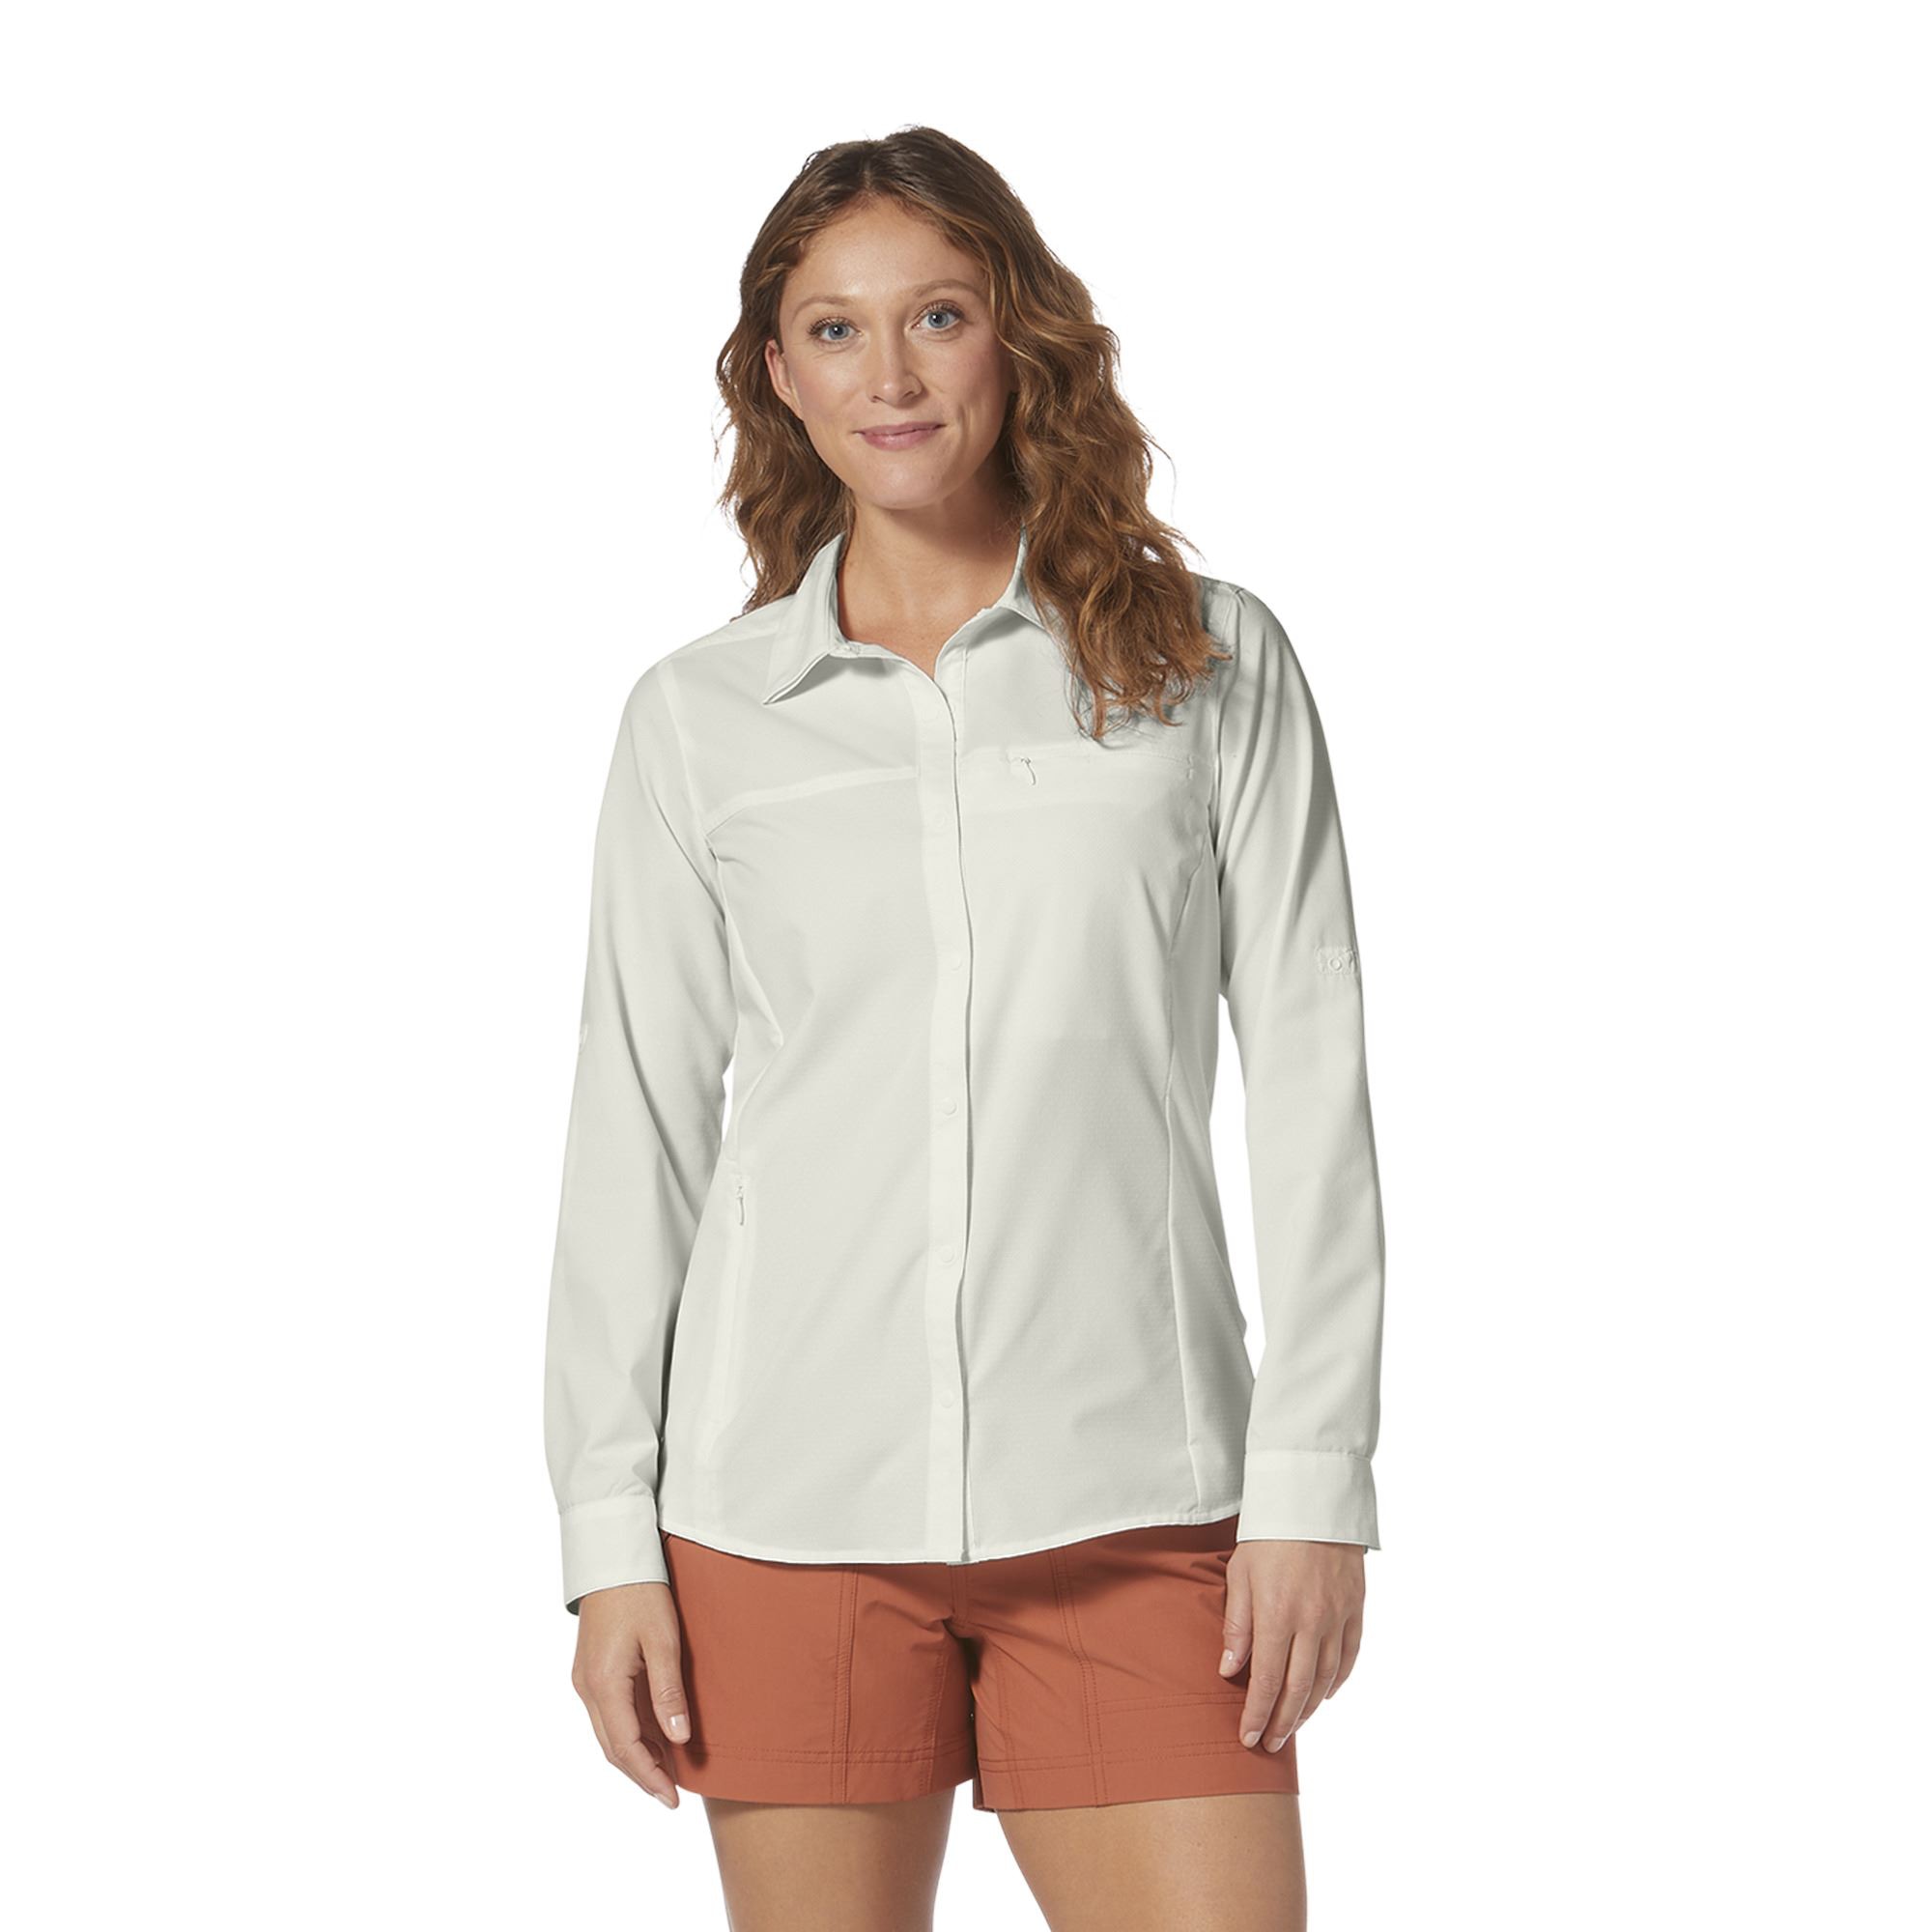 Women's Expedition Pro Long Sleeve